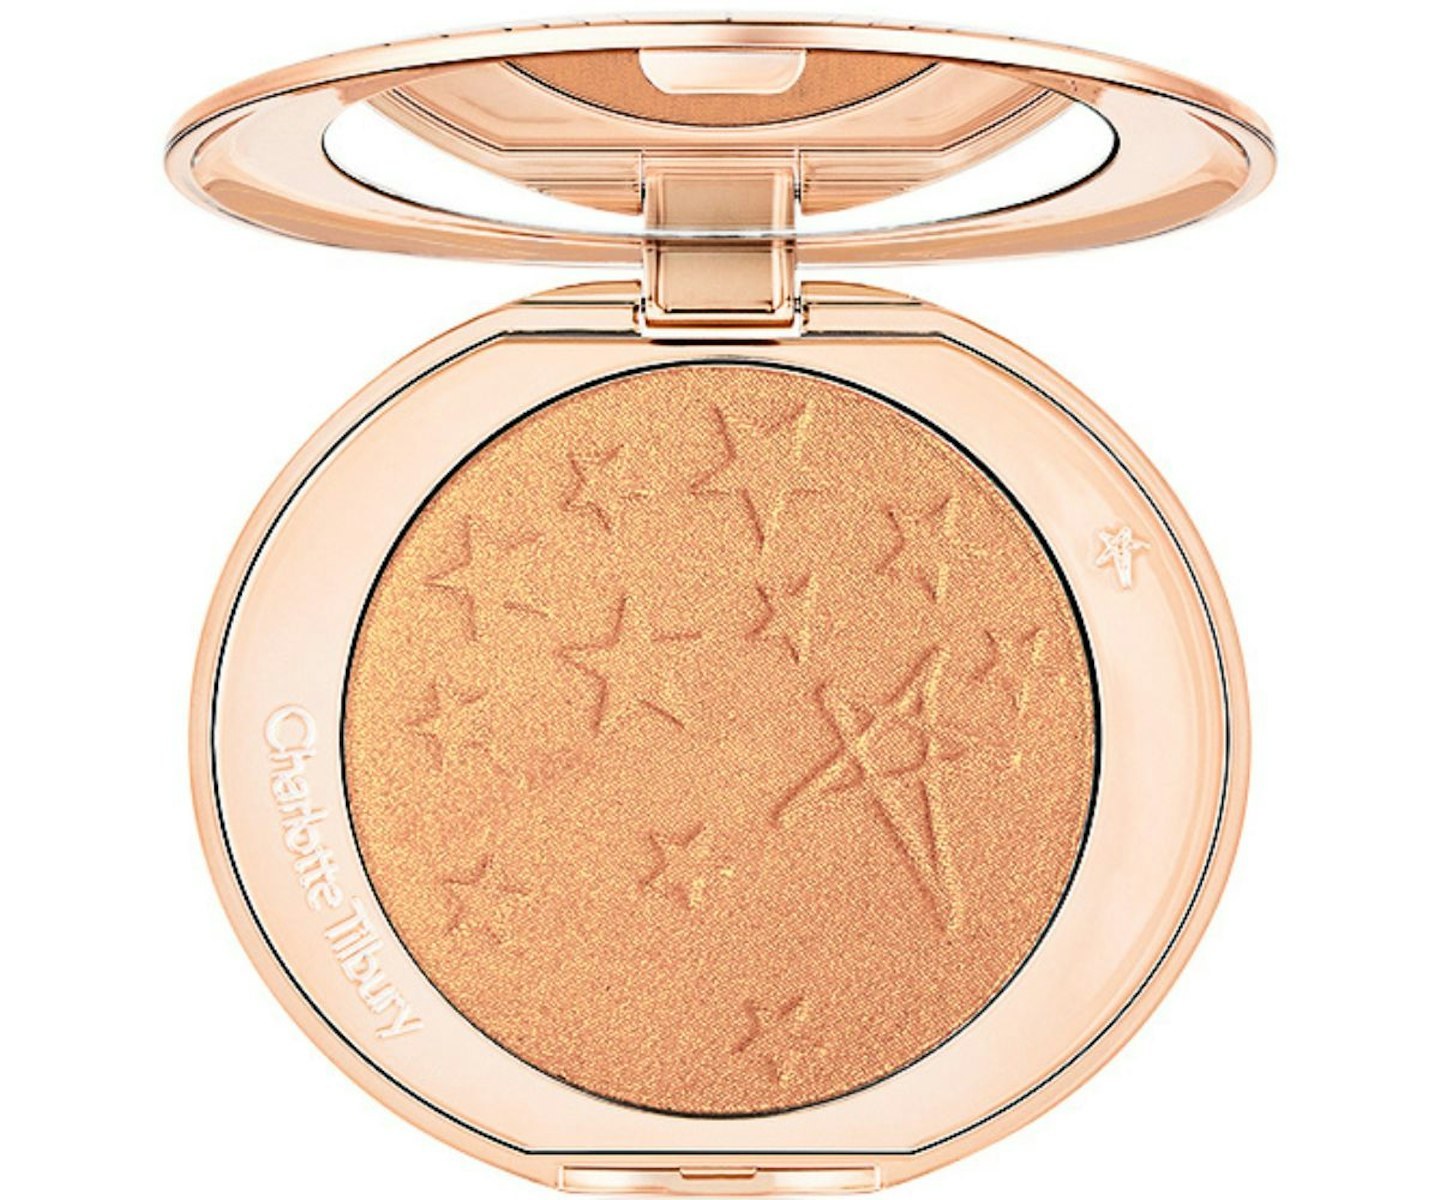 Charlotte Tilbury's New Highlighter Has Landed And TikTok Is Obsessed